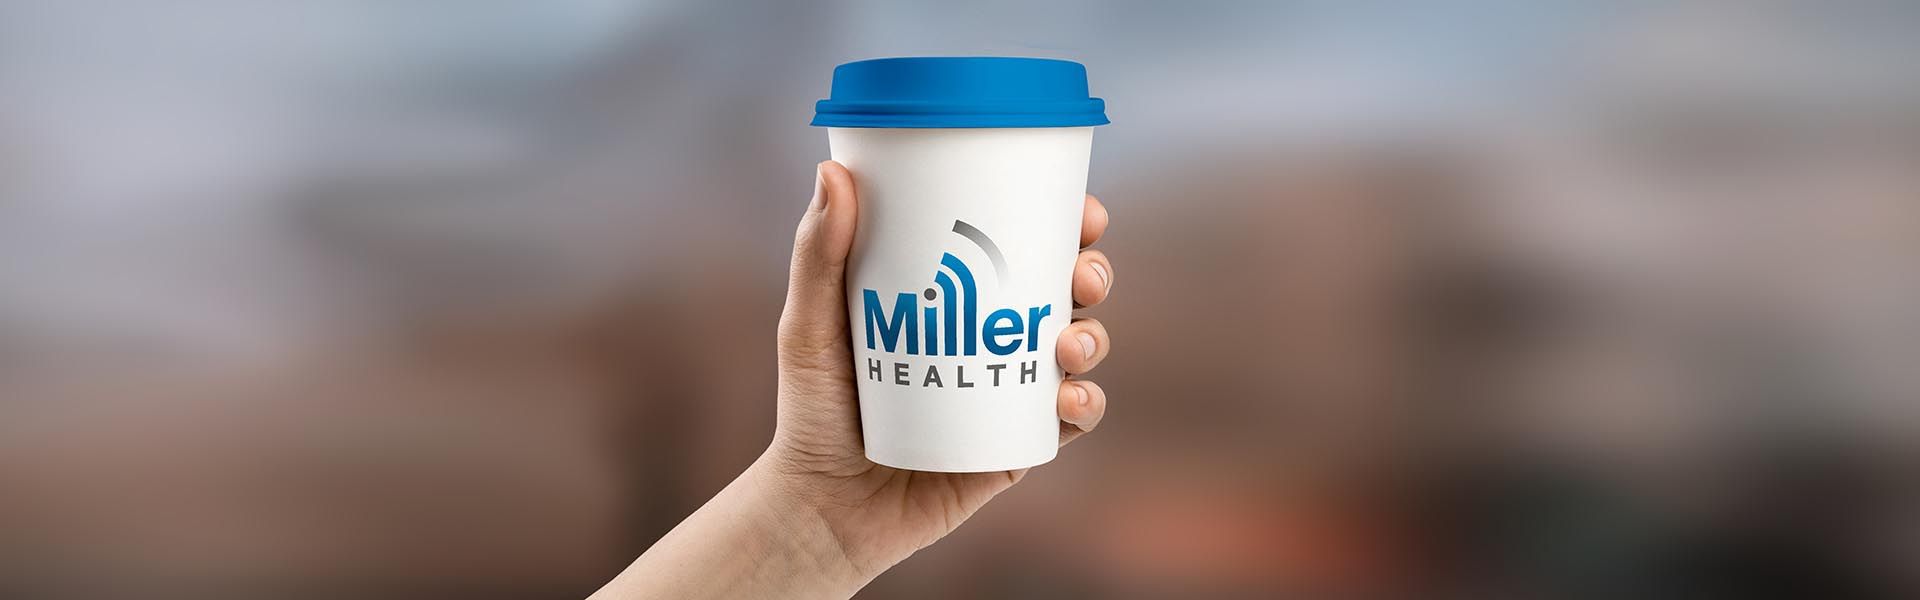 A person is holding a cup of miller health in their hand.